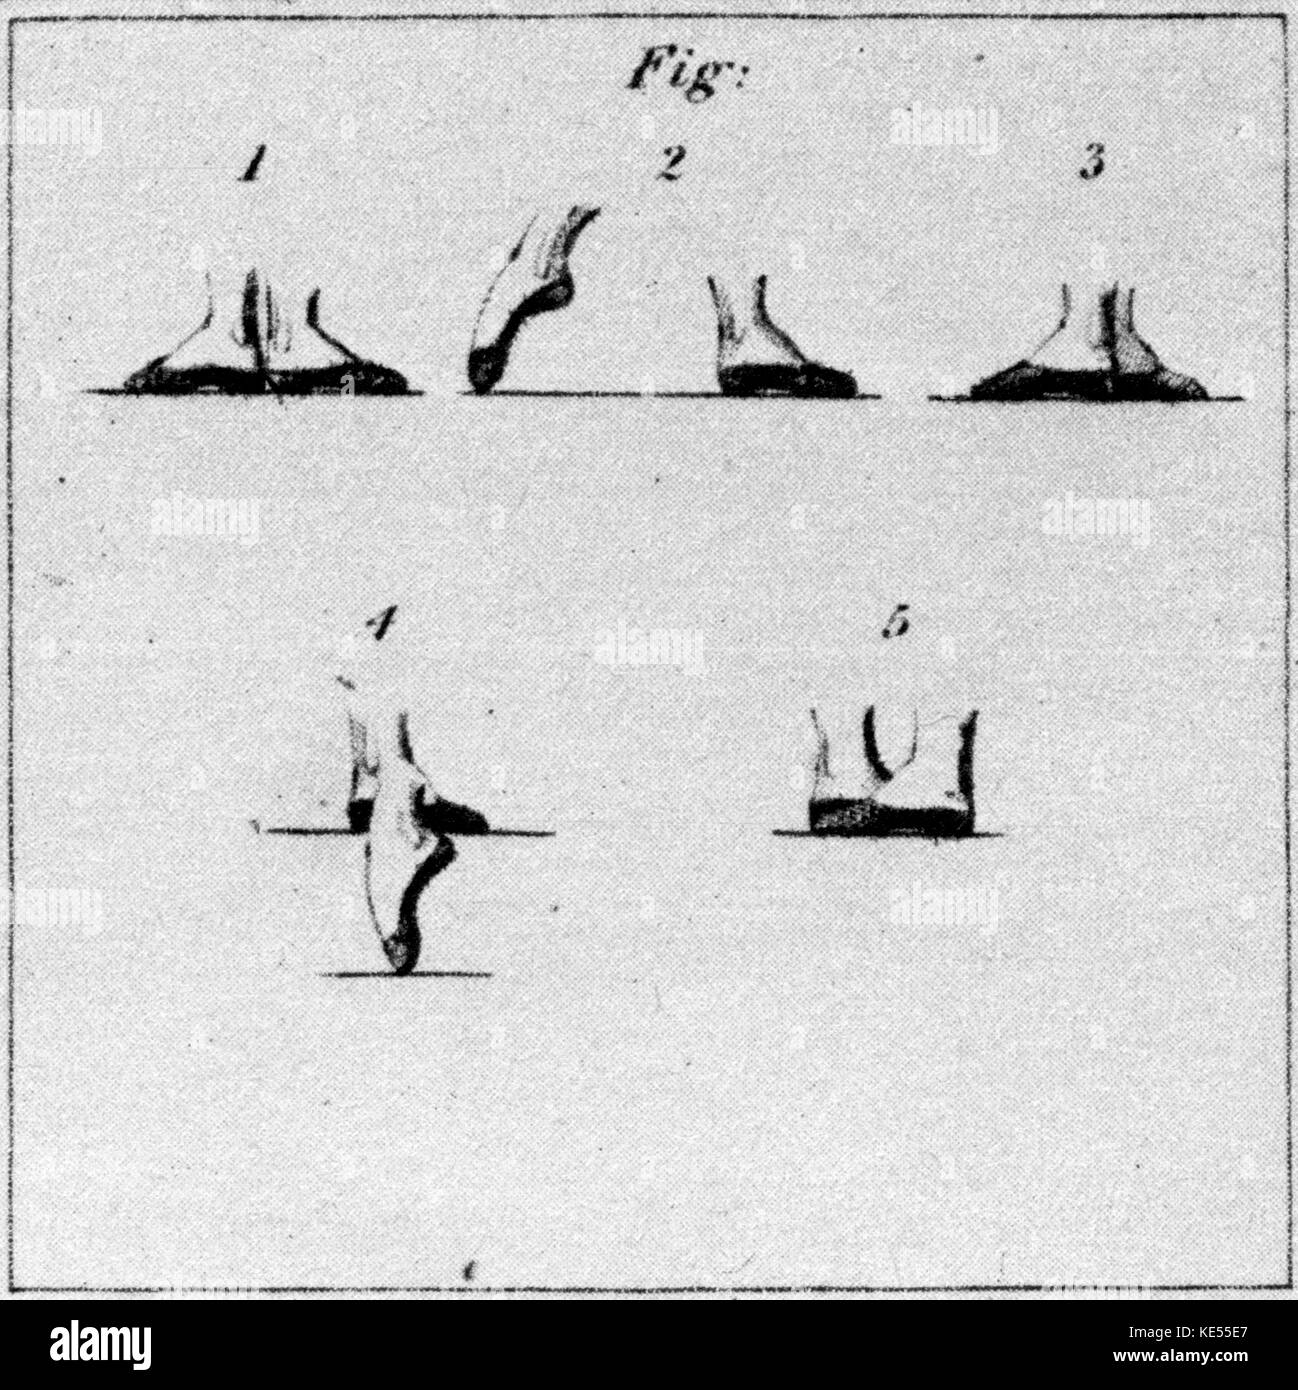 Dance steps of the Waltz. Sketches showing positions of waltzing. From Thomas Wilson 's 'Description of the Correct Method of Waltzing', 1816. Stock Photo